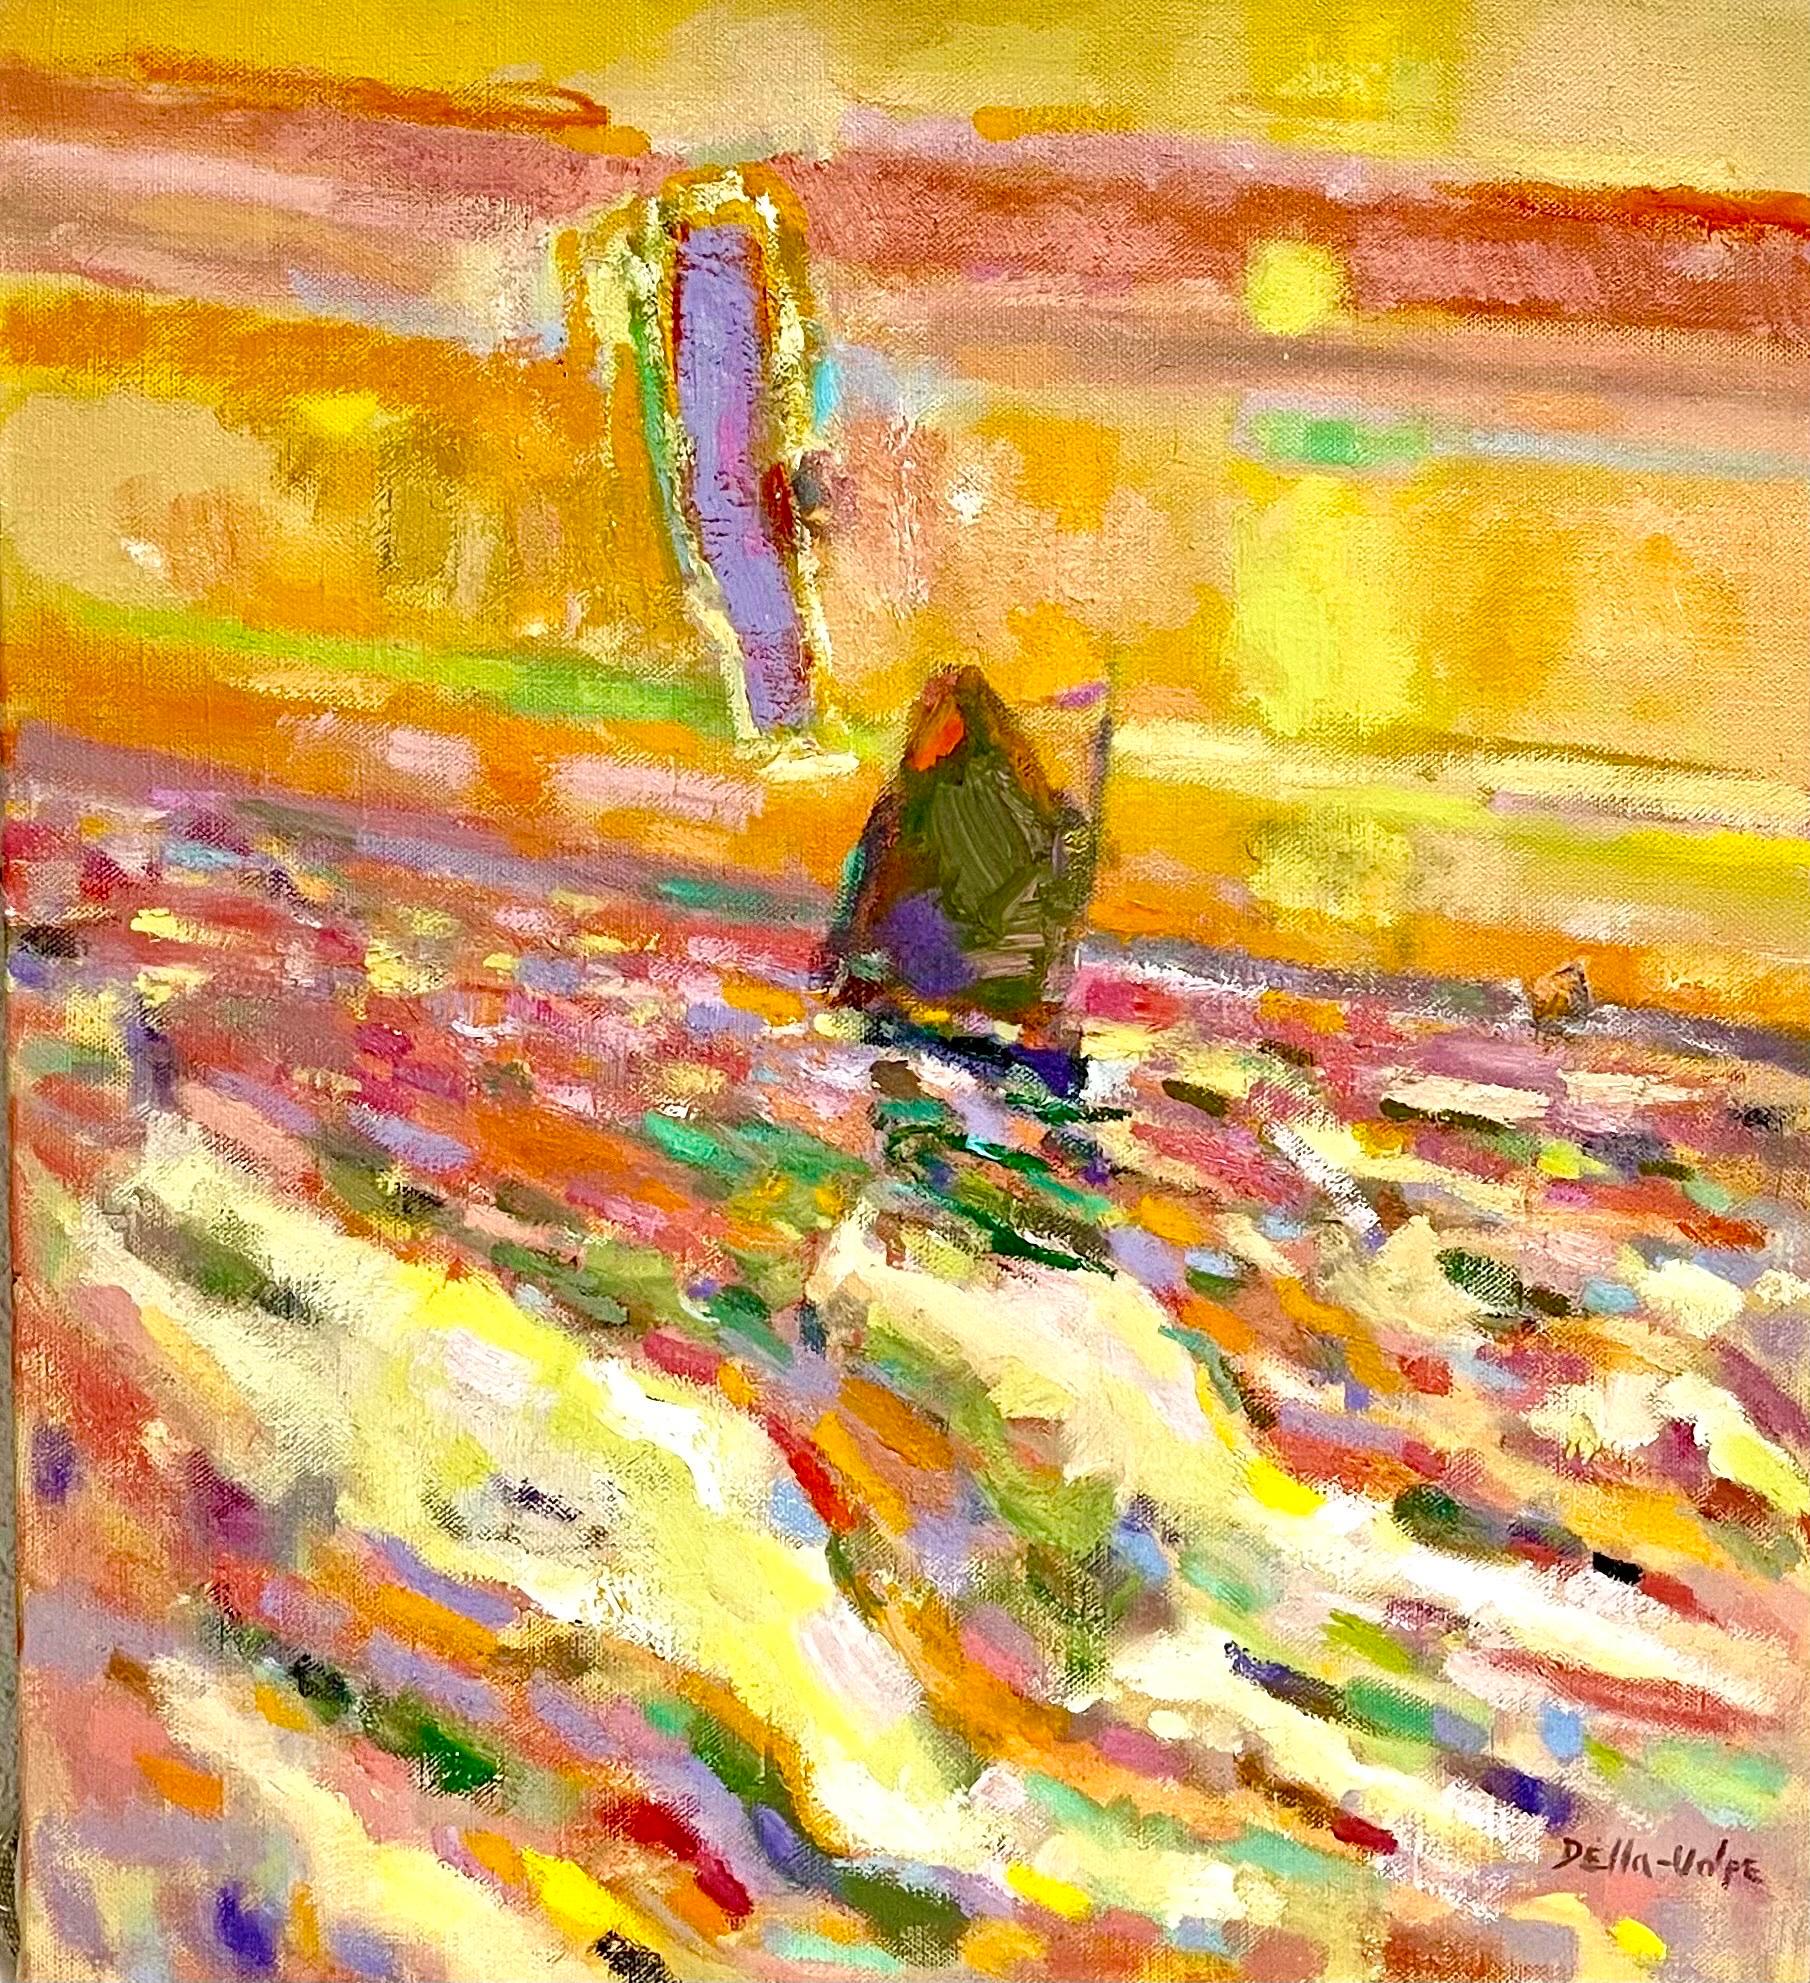 RALPH DELLA-VOLPE  (1923-2017)
Fine Art Painter, American Contemporary  
Sunset Sail
Oil on canvas
Hand signed lower right and verso
22 x 20 inches

Provenance: The Estate of the artist Ralph Della Volpe

TRAINING:
National Academy of Design
The Art